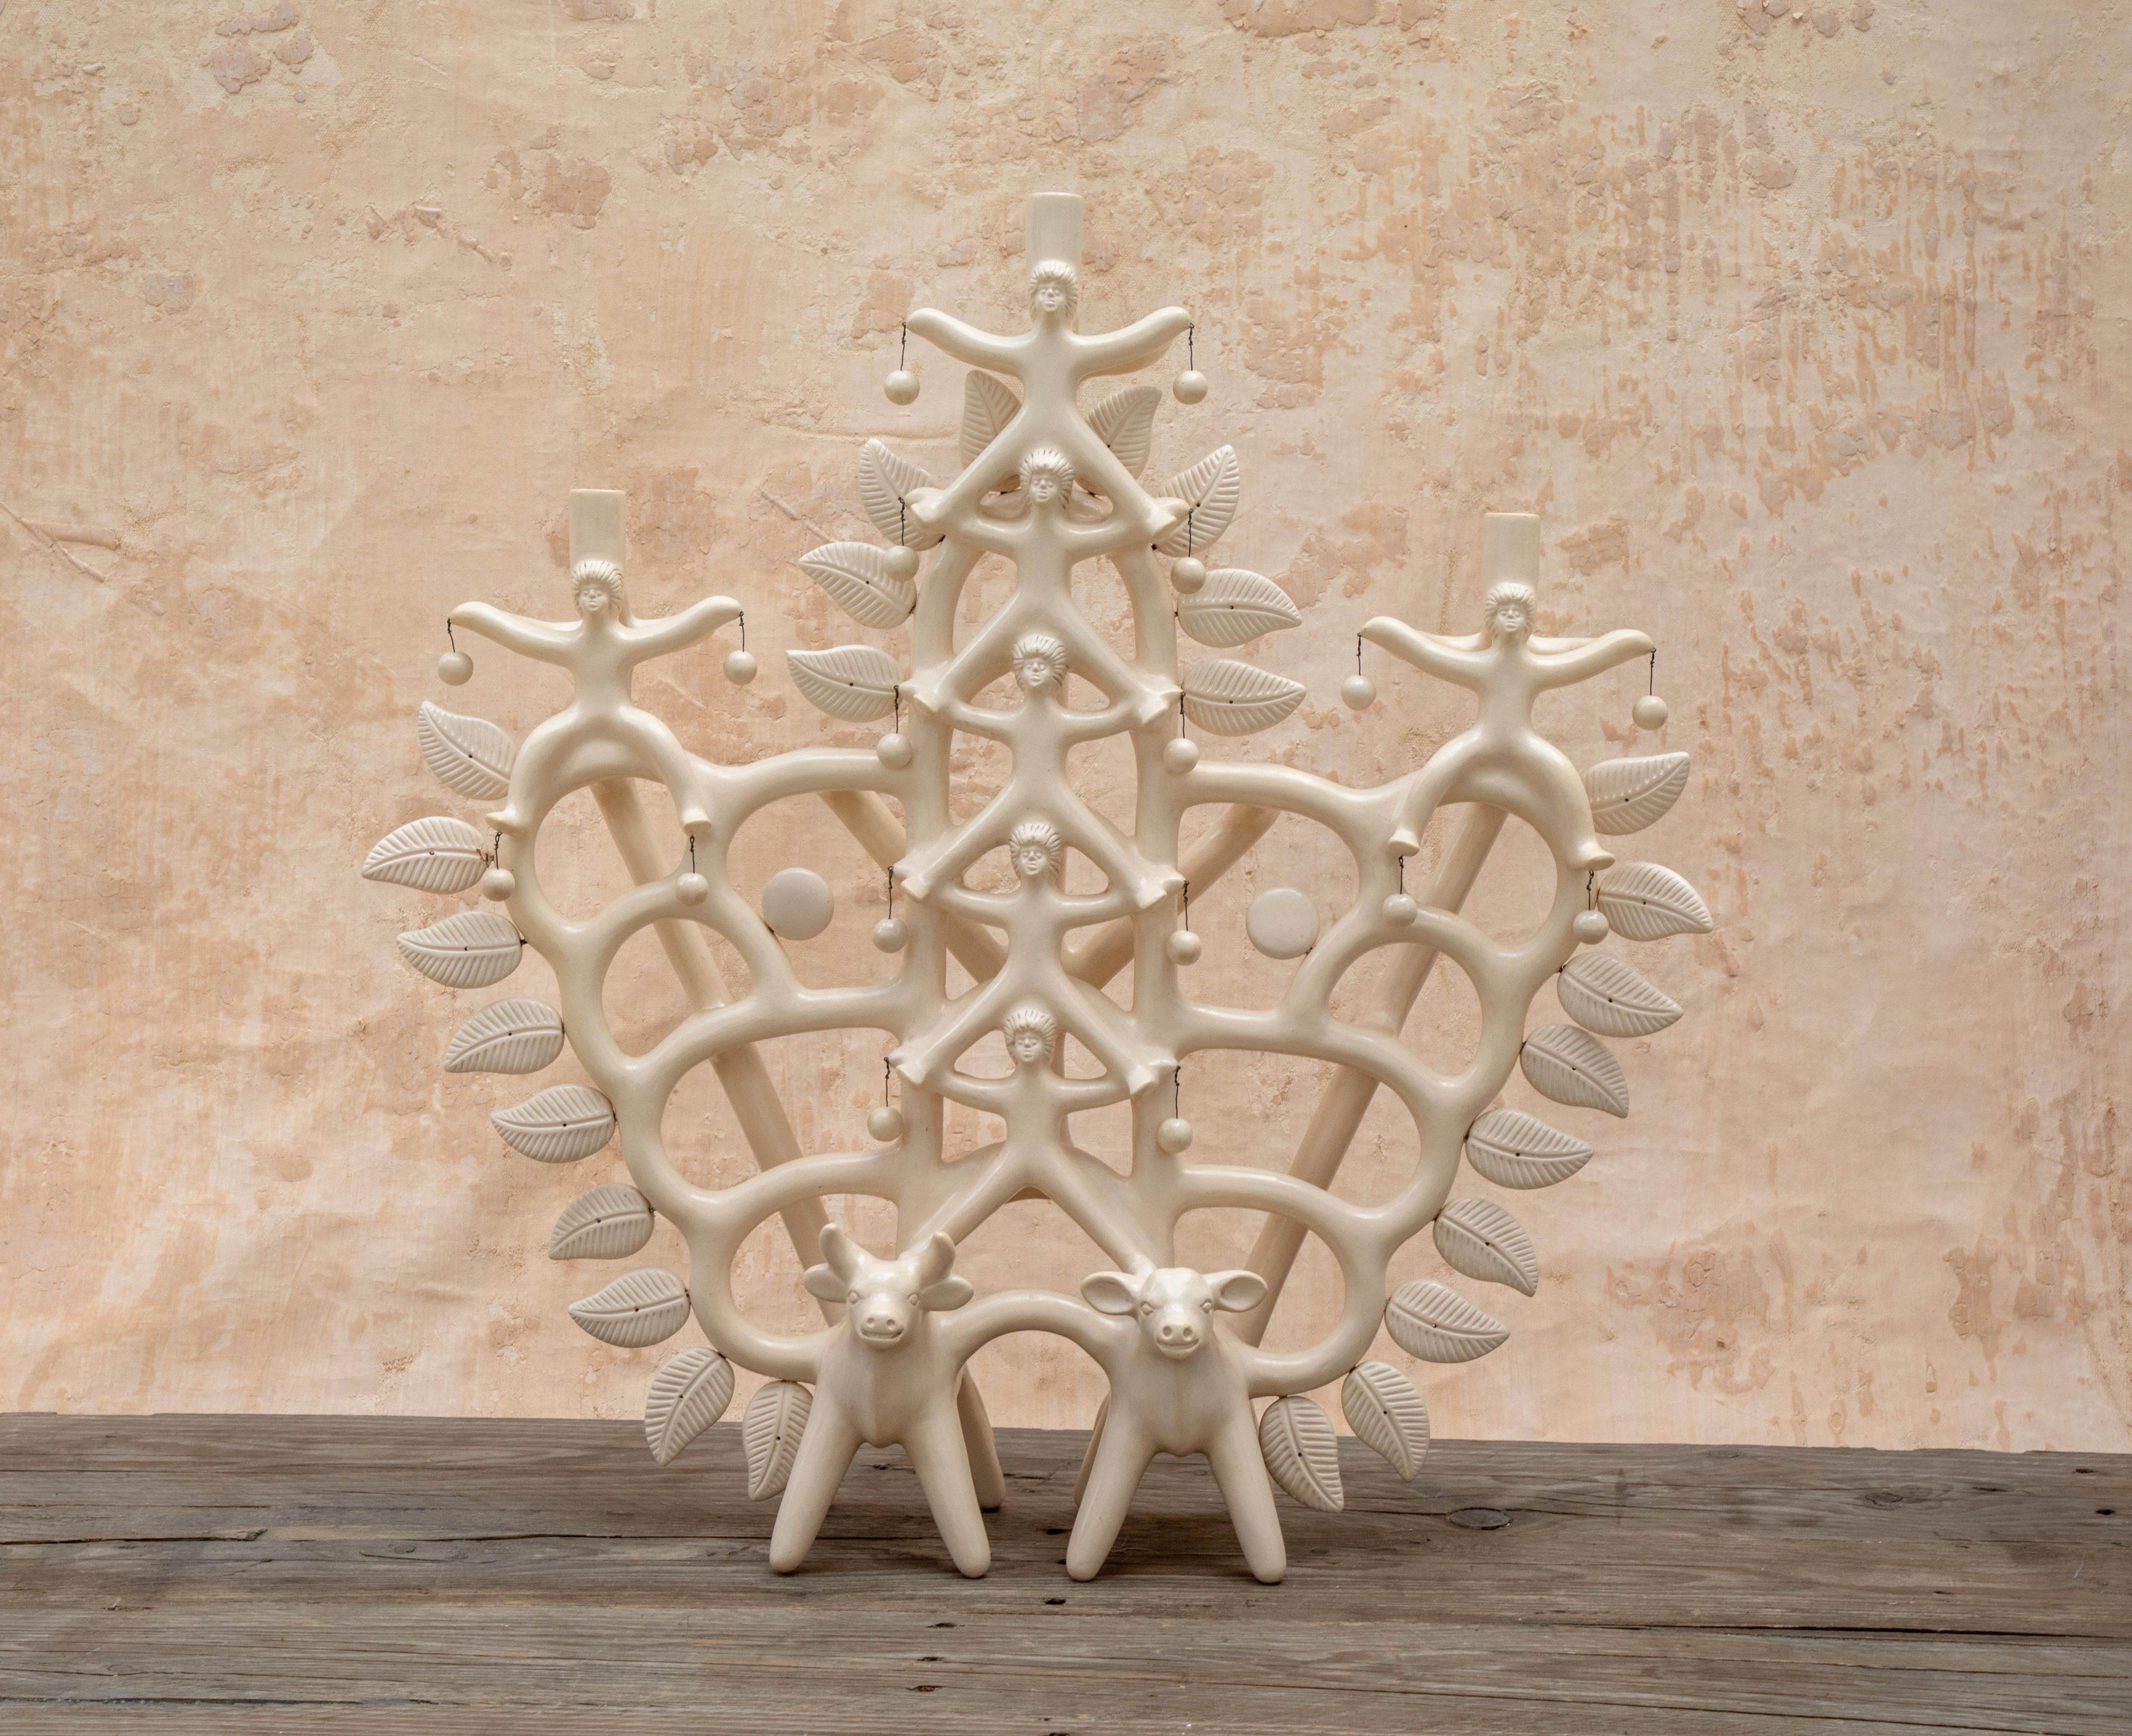 Arbol Acatlán Cirquero candleholder by Onora
Dimensions: W 60 x D 15 x H 73 cm
Materials: Clay, Quartz stone

Hand sculpted clay, covered with a mineral based slip and burnished using a quartz stone. The “Circo Collection” is a reproduction of